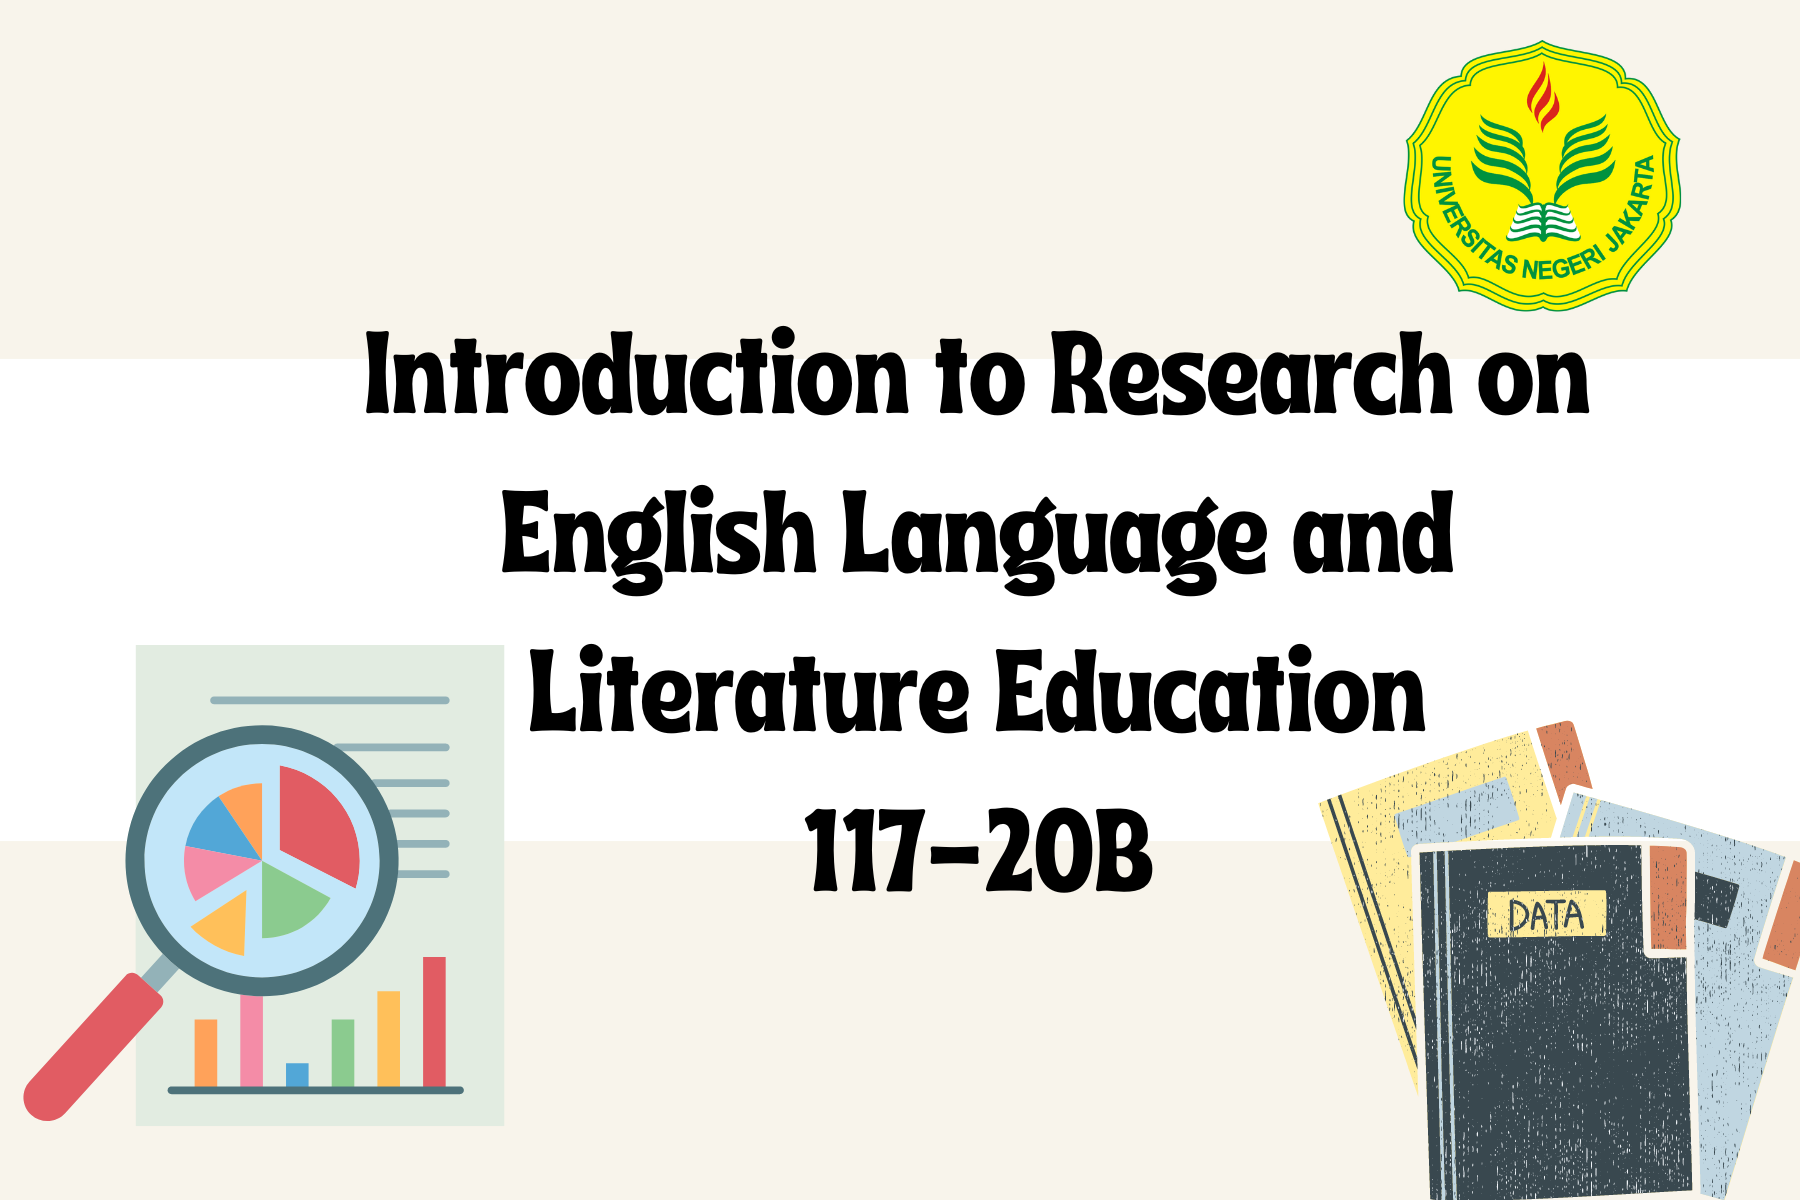 Introduction to Research on English Language and Literature Education (117-20B)